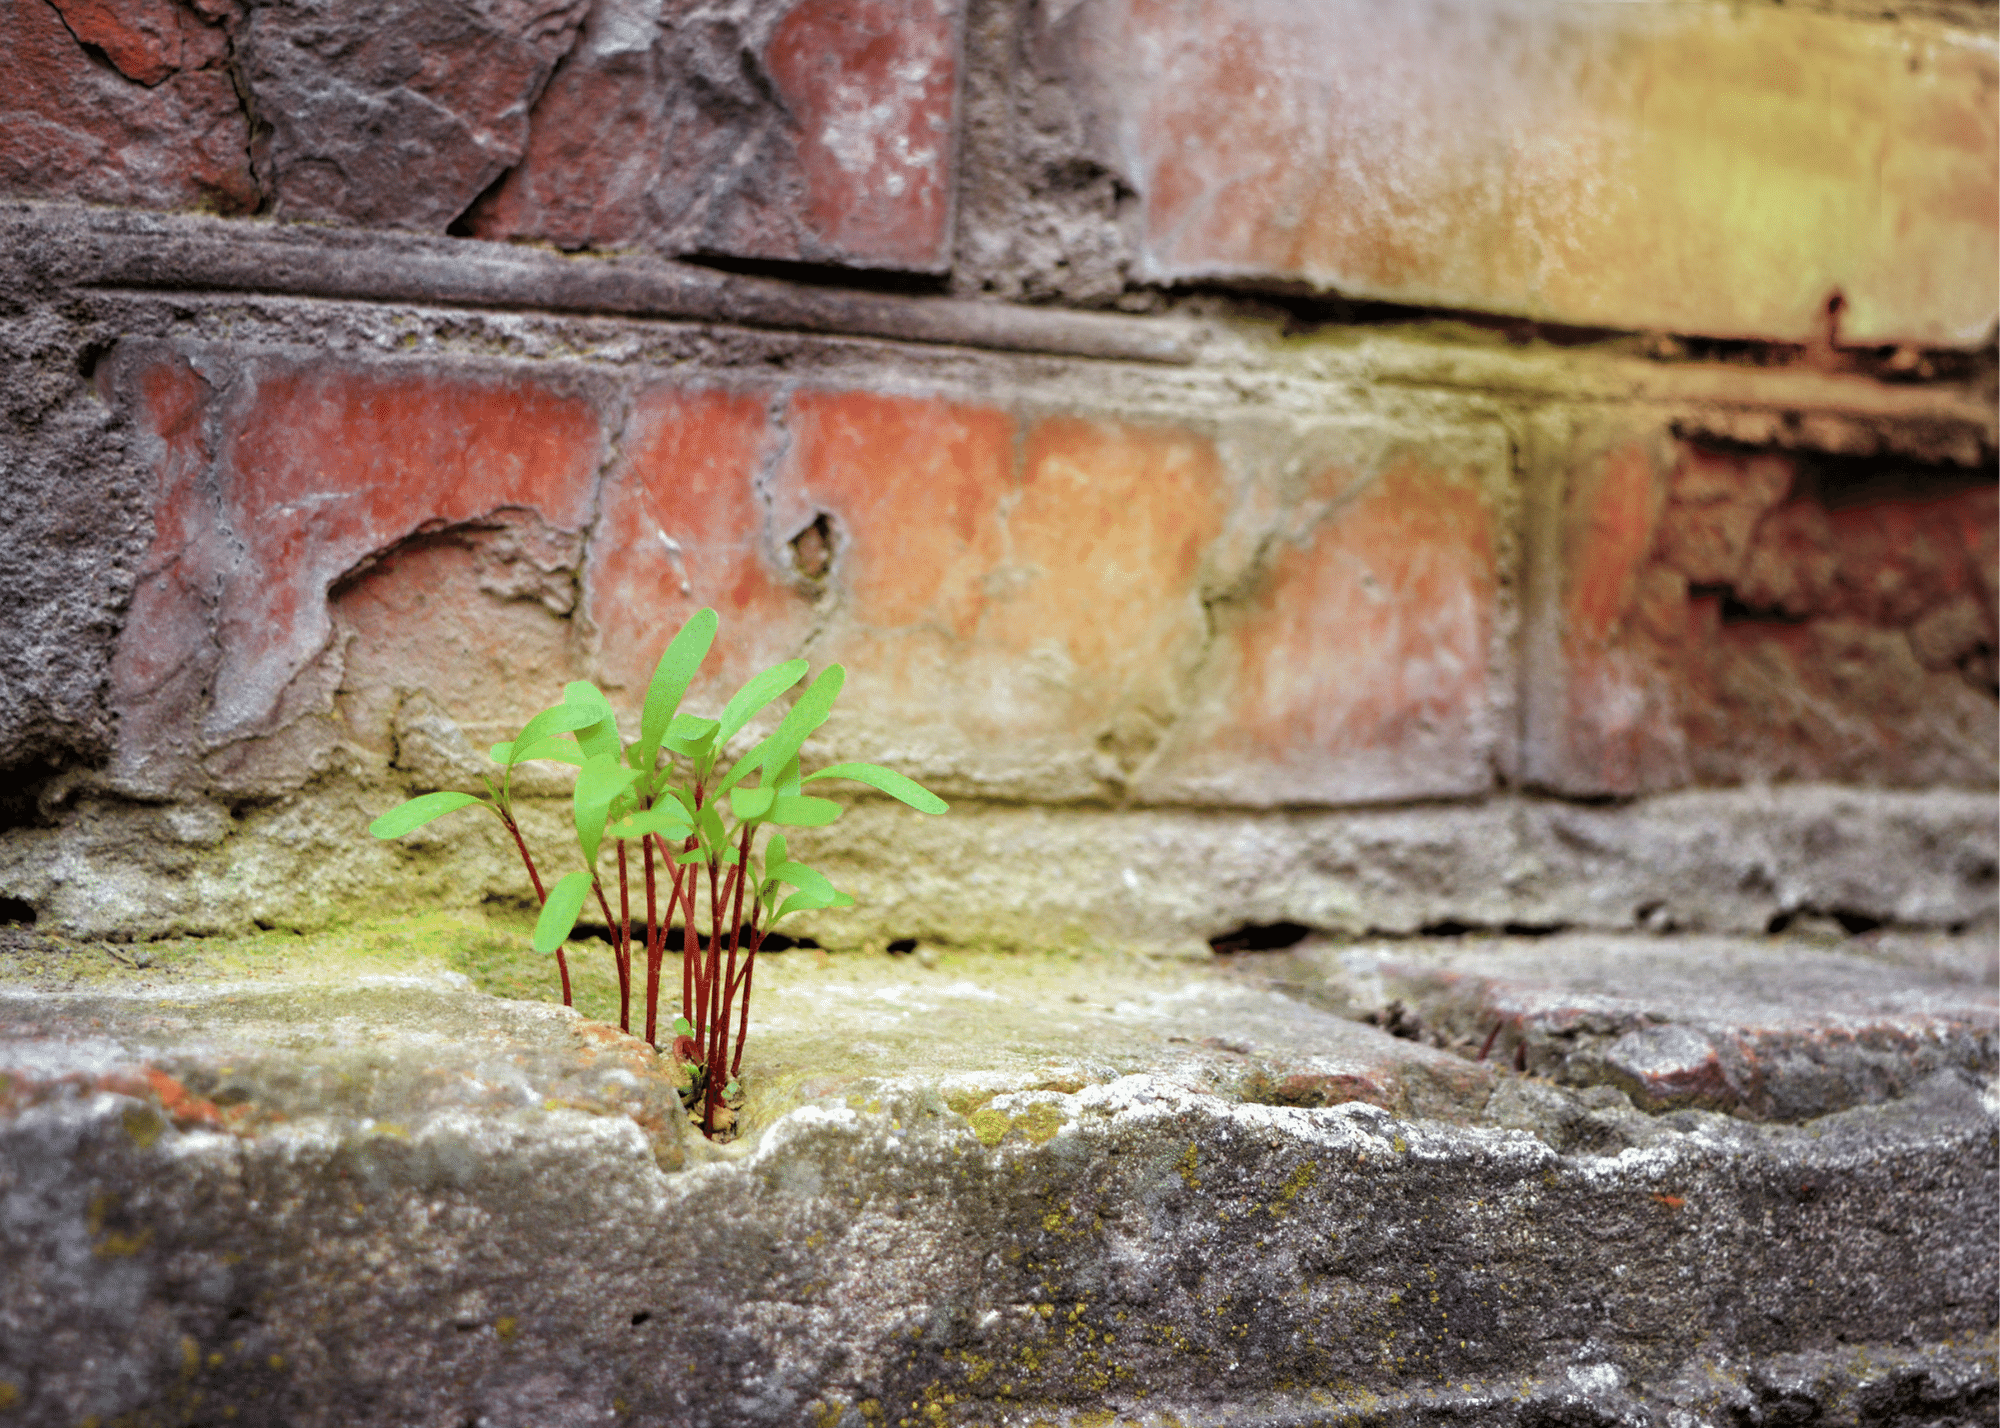 A close up photo of a small plant growing in a crack in some concrete. There is a brick in background